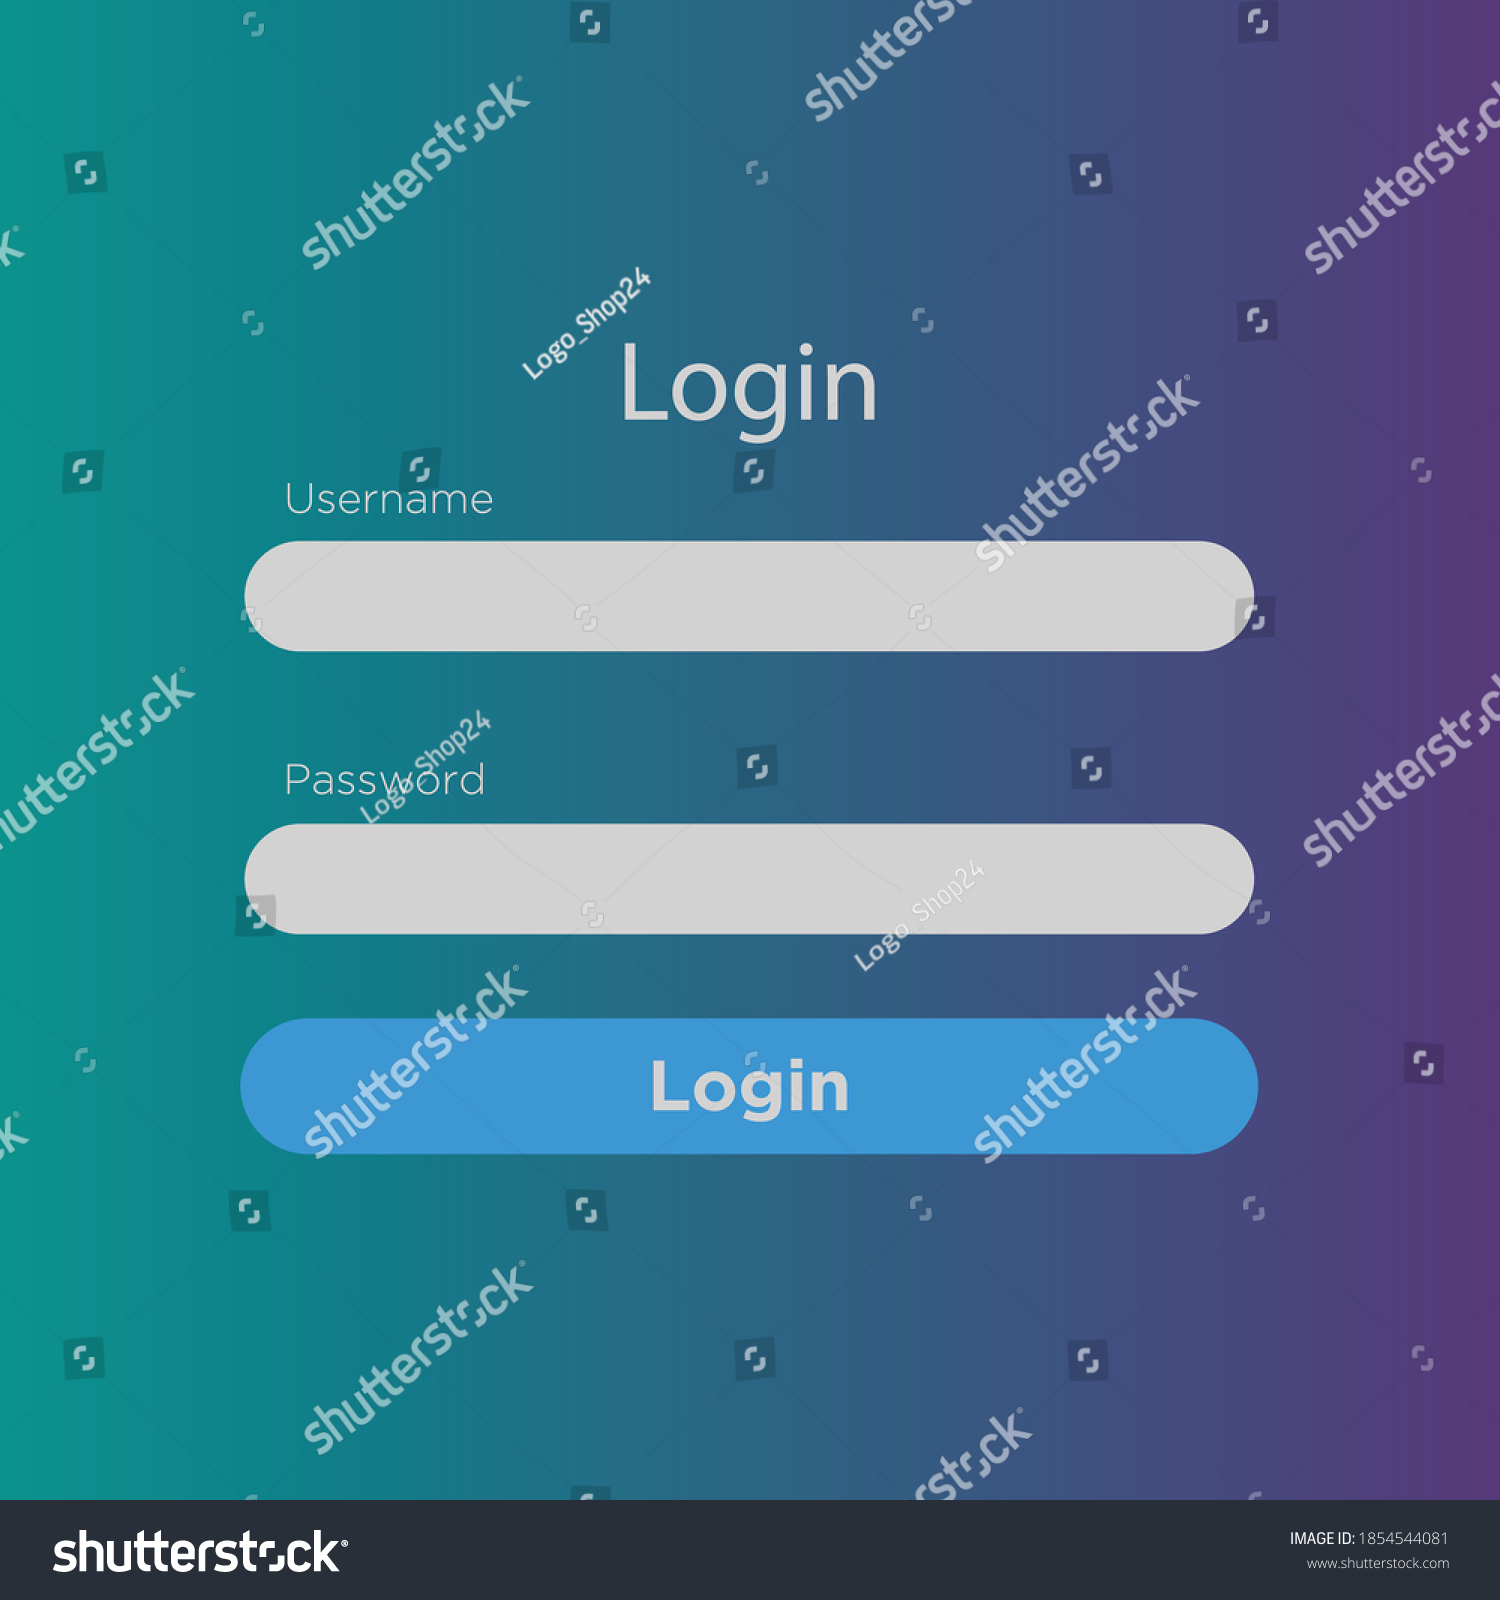 beautiful-examples-of-login-forms-for-websites-royalty-free-stock